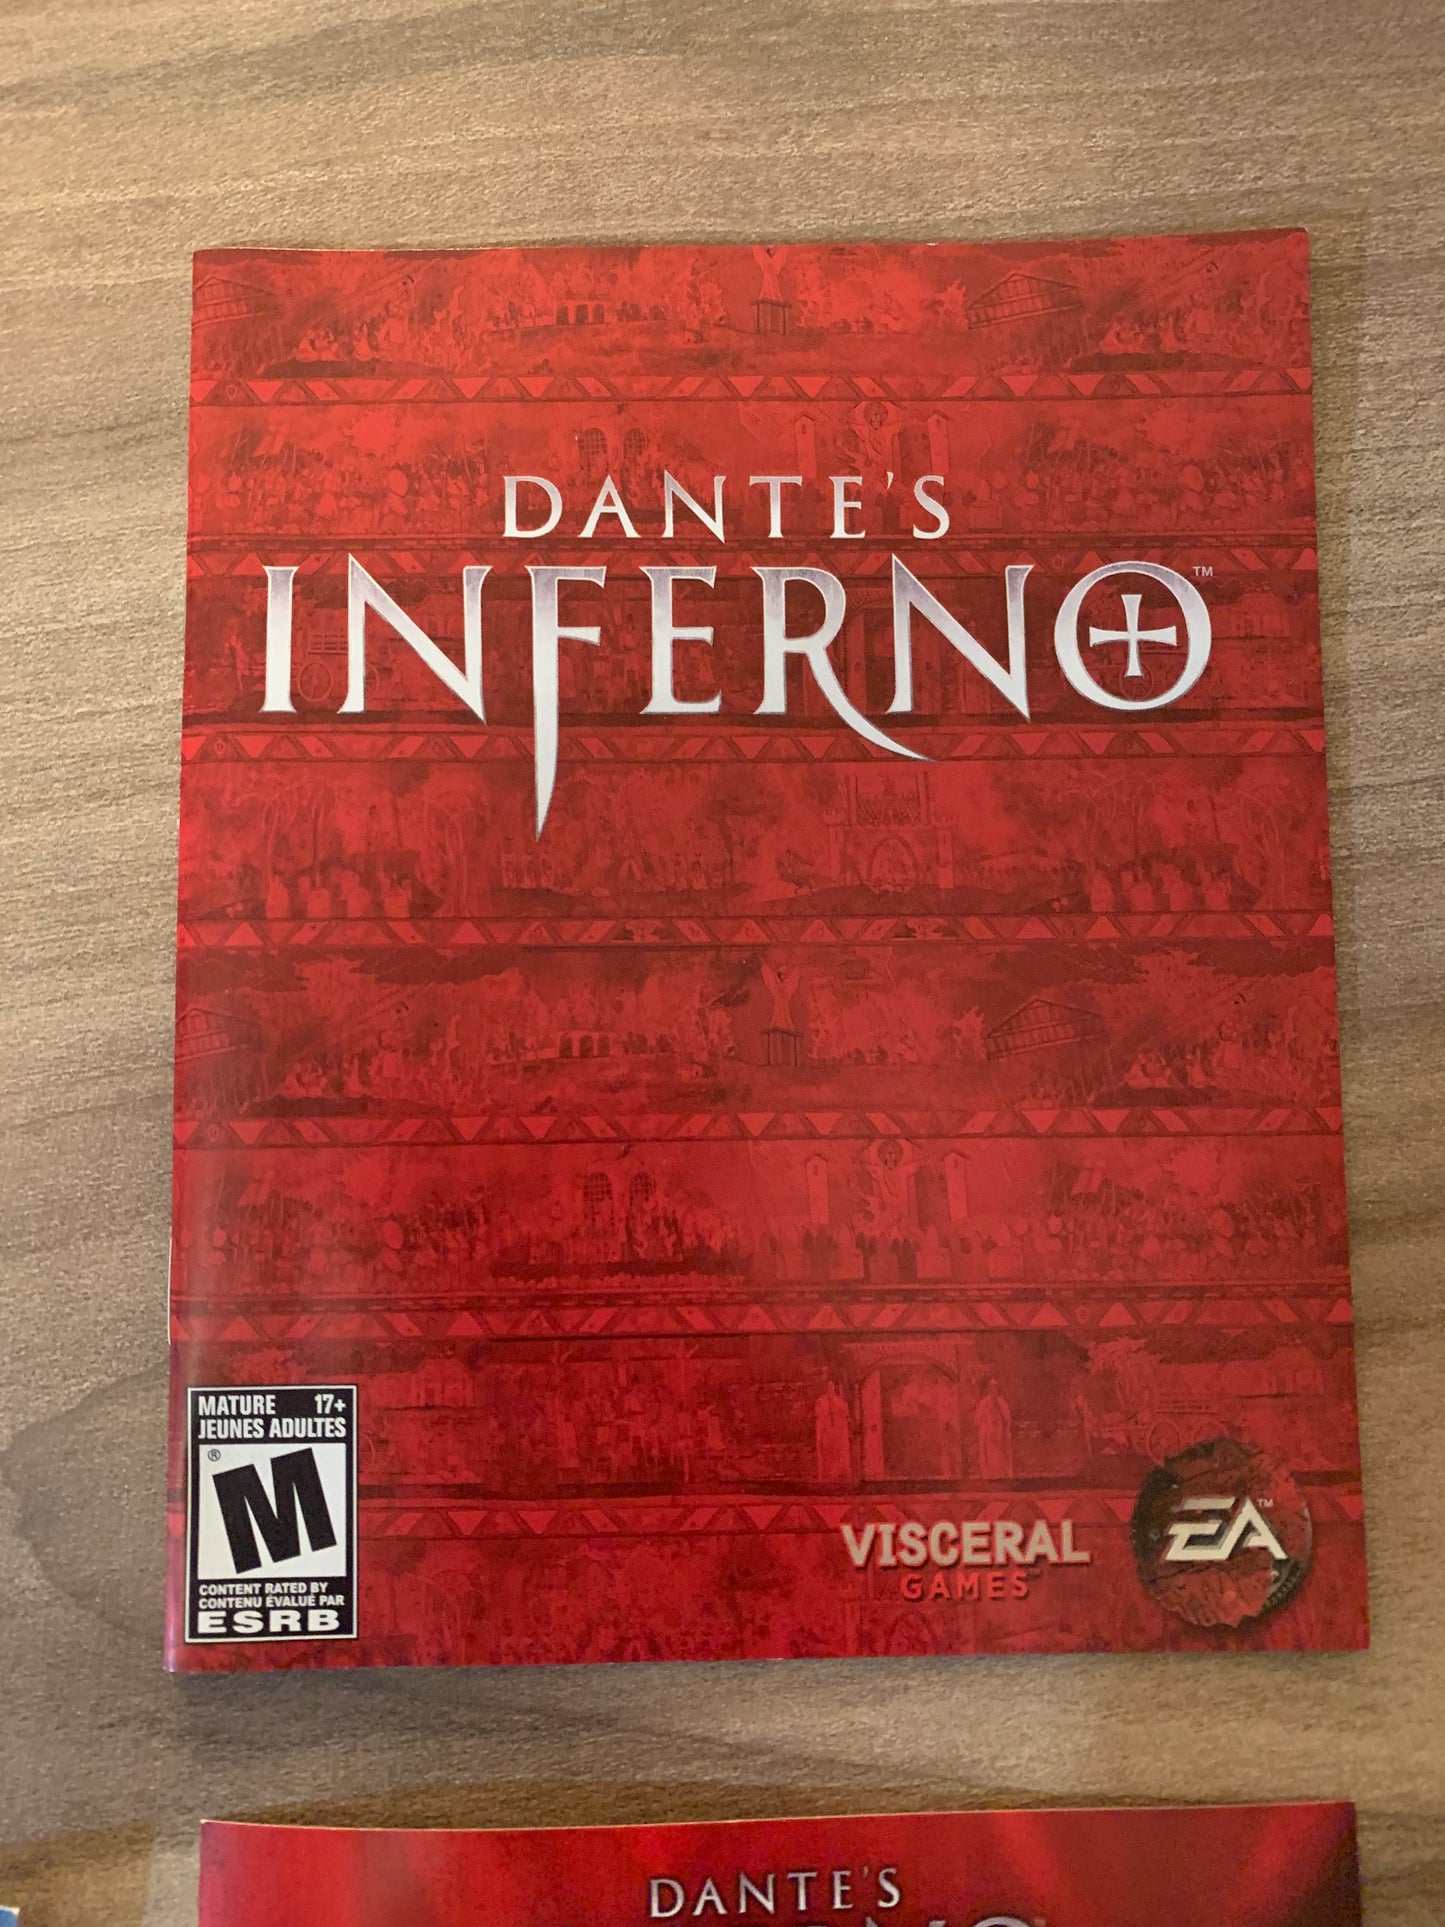 SONY PLAYSTATiON 3 [PS3] | DANTES iNFERNO | DiViNE EDiTiON